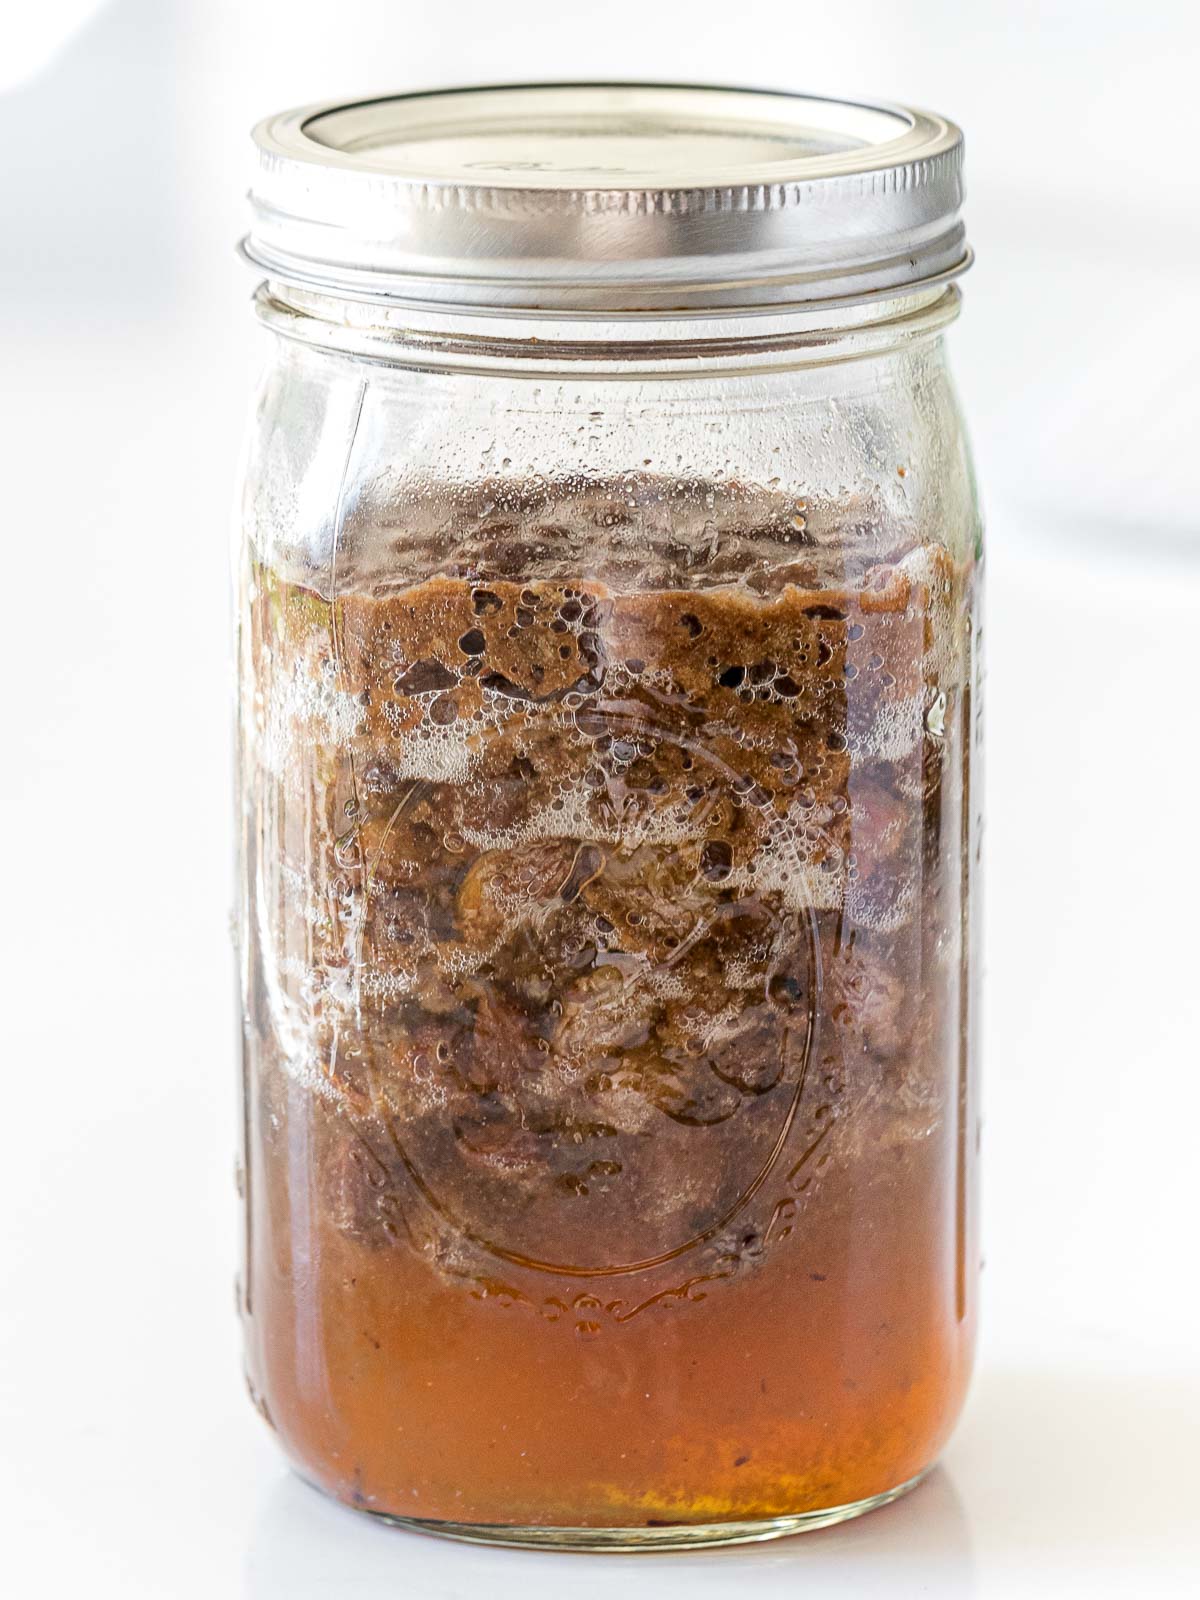 fermented raisin yeast water showing bubbles and floating raisins in a glass mason jar with a lid